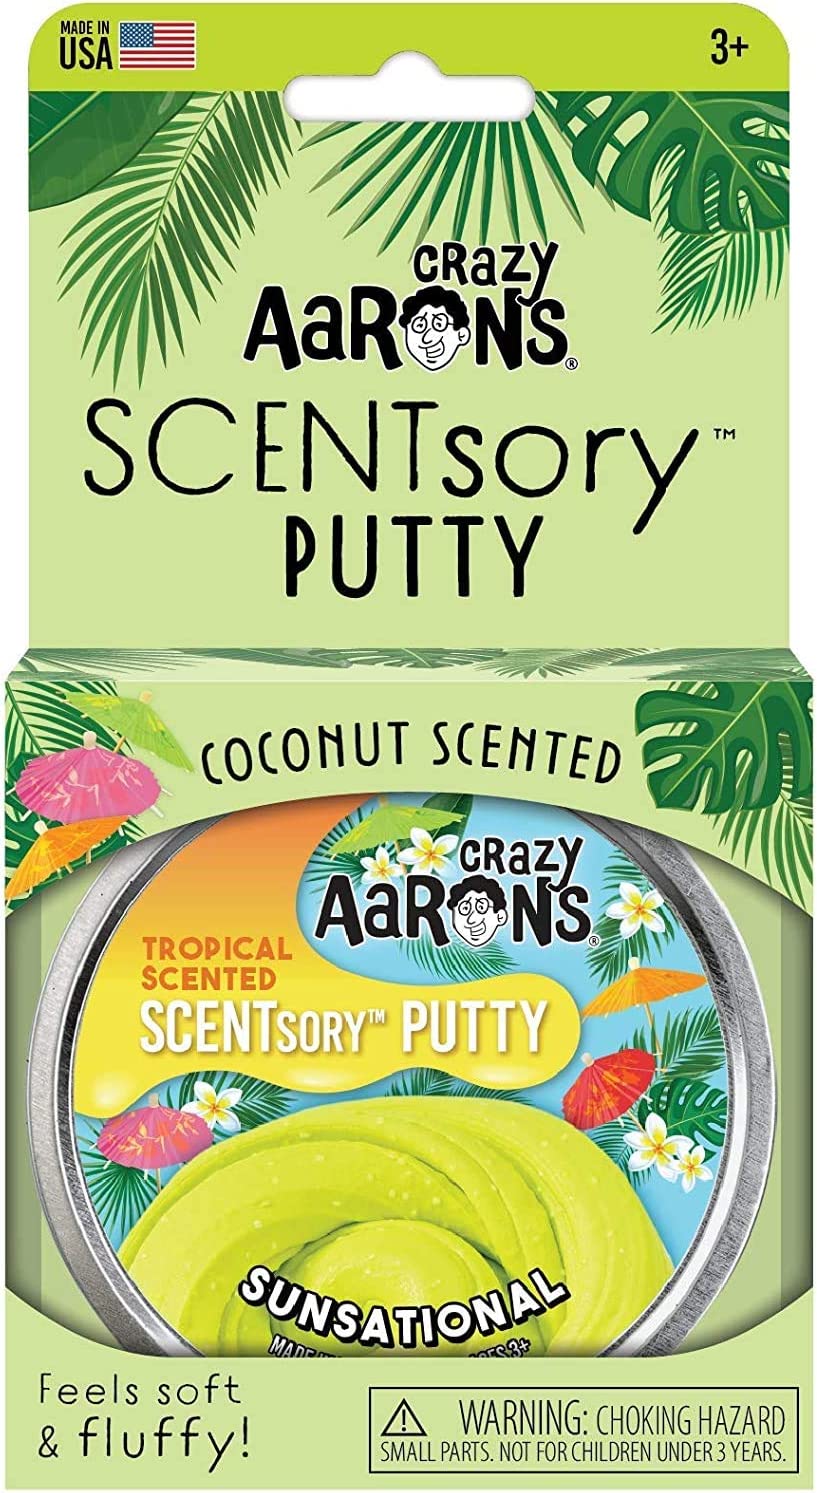 Aarons Tropical Scented Sunsational Putty